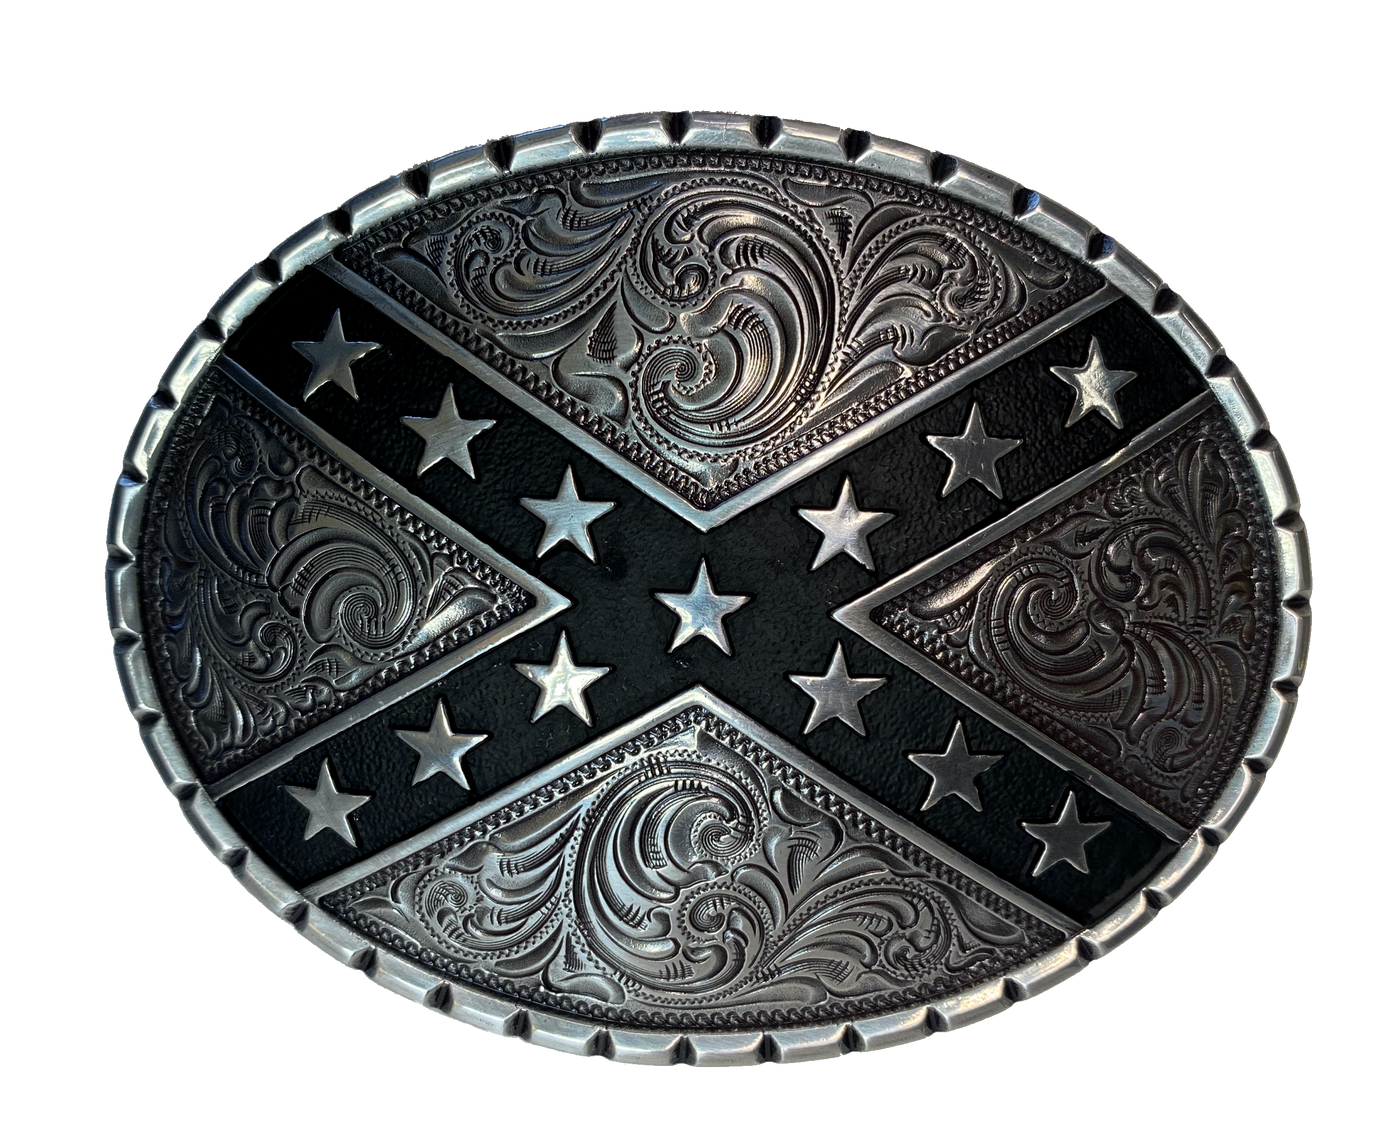 This antique silver buckle, with stars on black bars and set over an ornate western scroll background, has an oval shape that is comfortable for most body types. Fits up to 1  1/2" belts. Dimensions are approx. 3 1/4" tall x 4 1/4"wide. Available online and in our shop in Smyrna, TN, just outside of Nashville